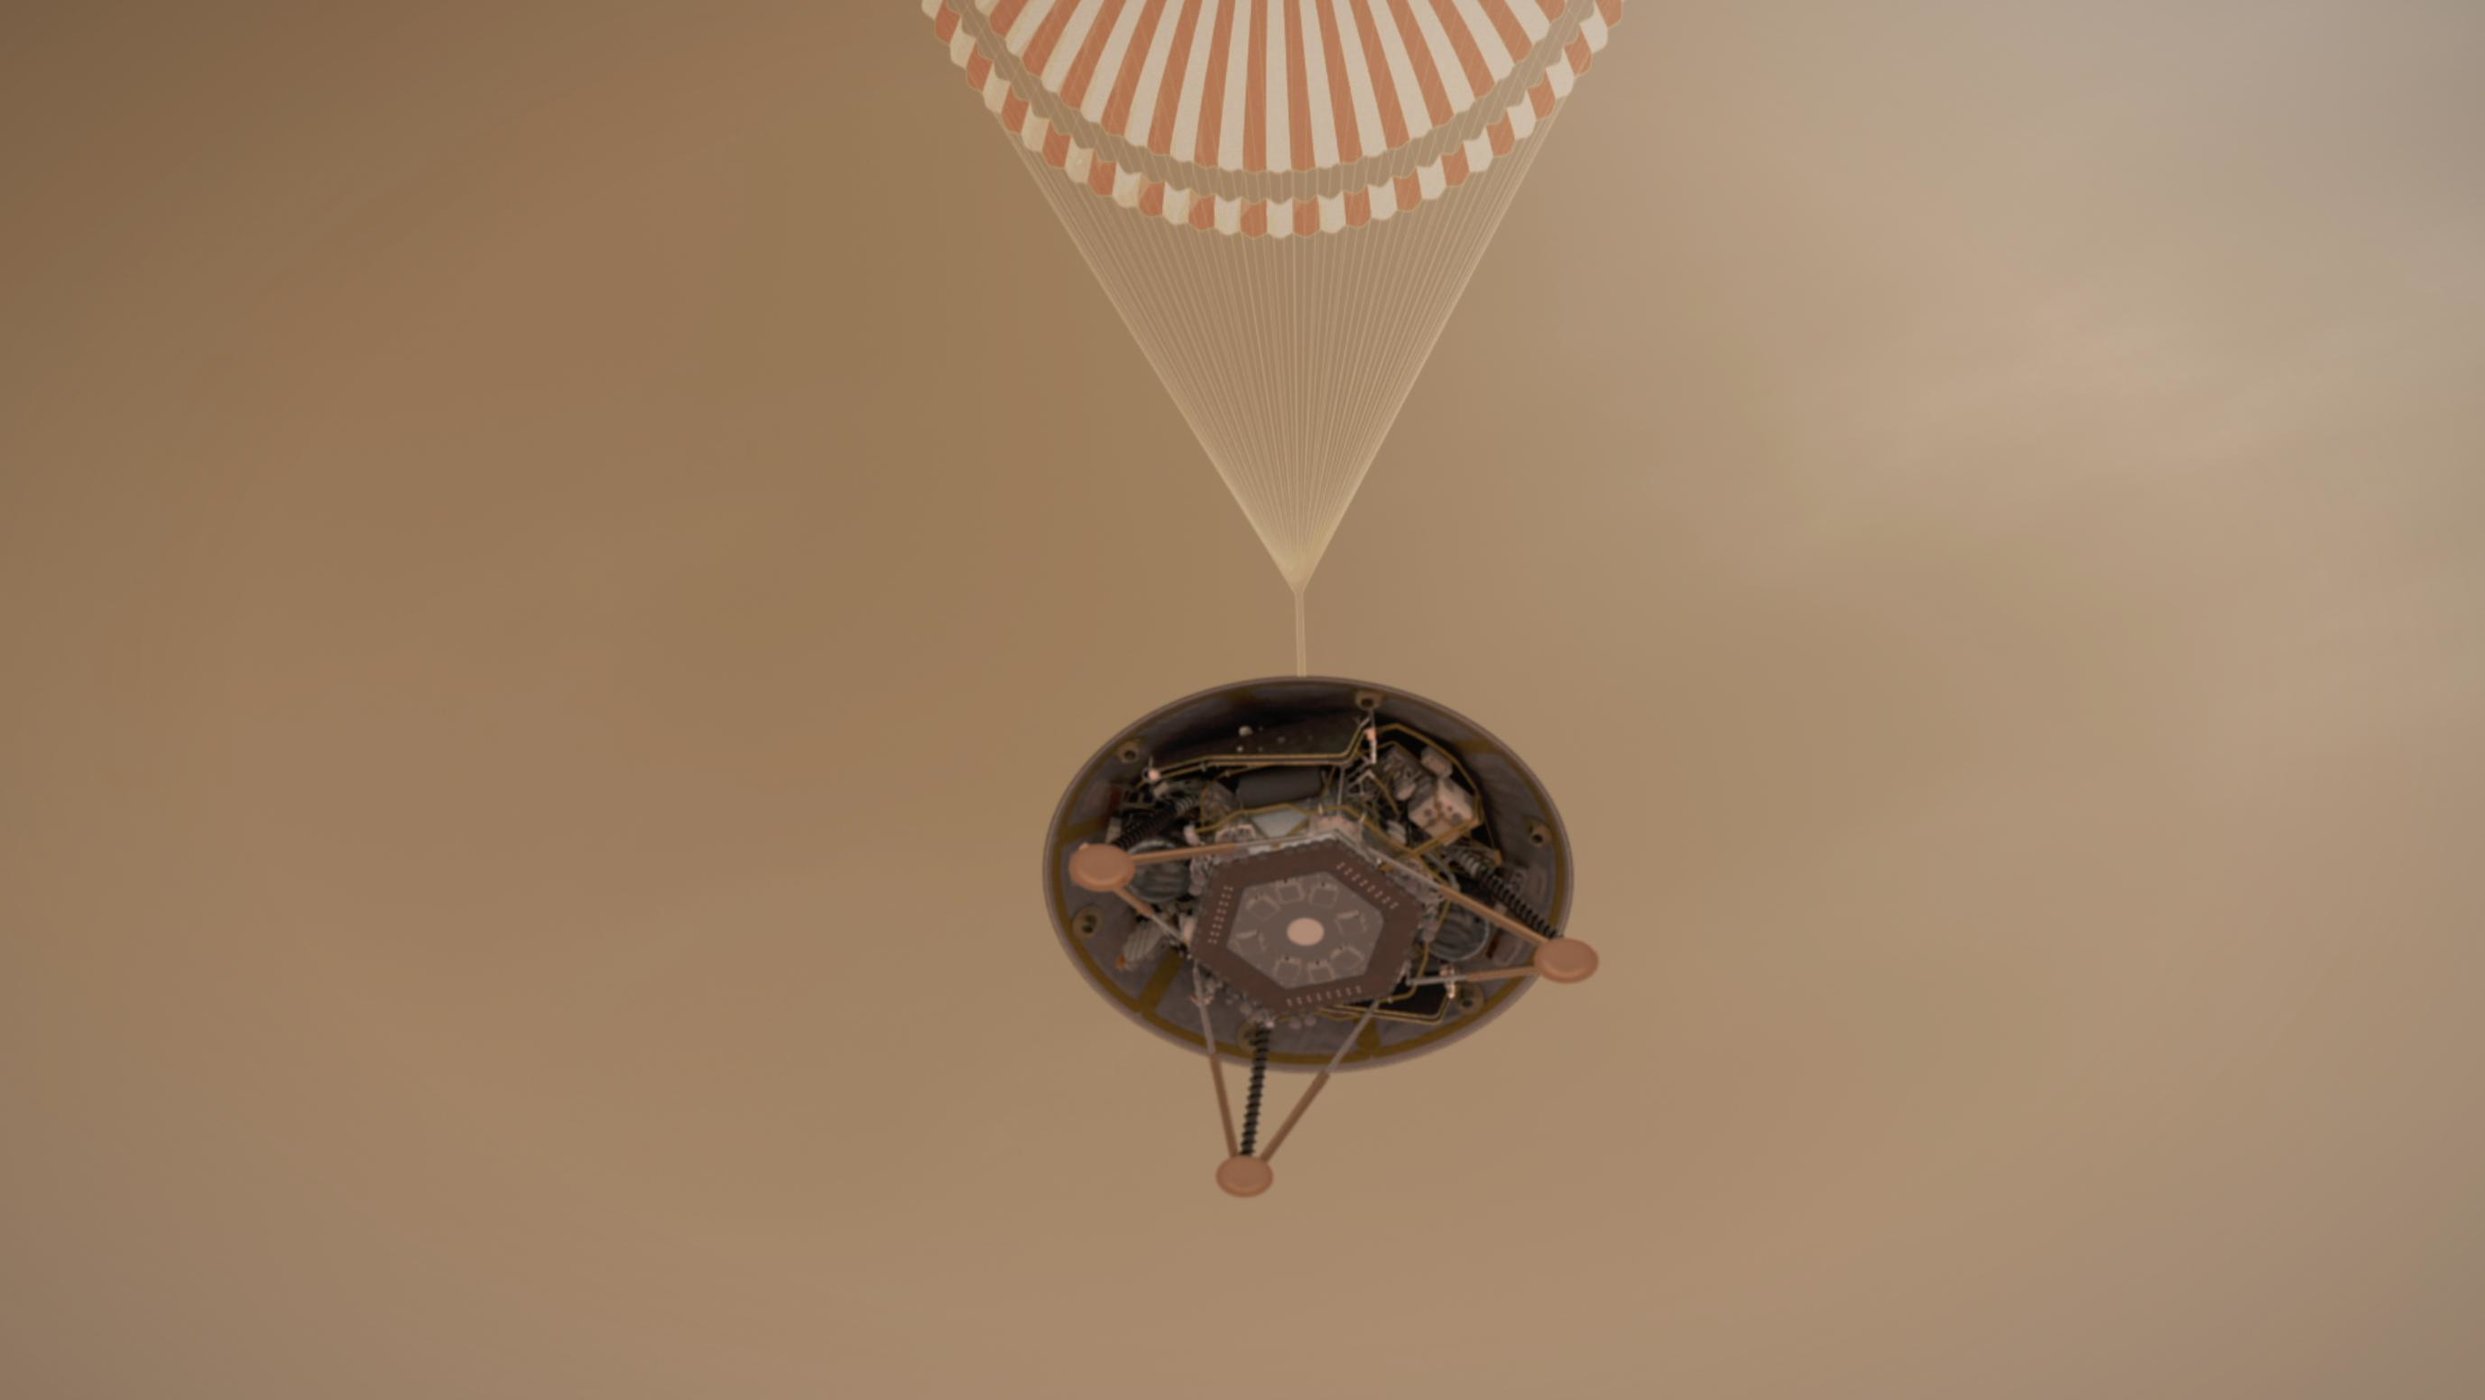 NASAs InSight Mars Lander Reaches Mars Today! Heres What to Expect